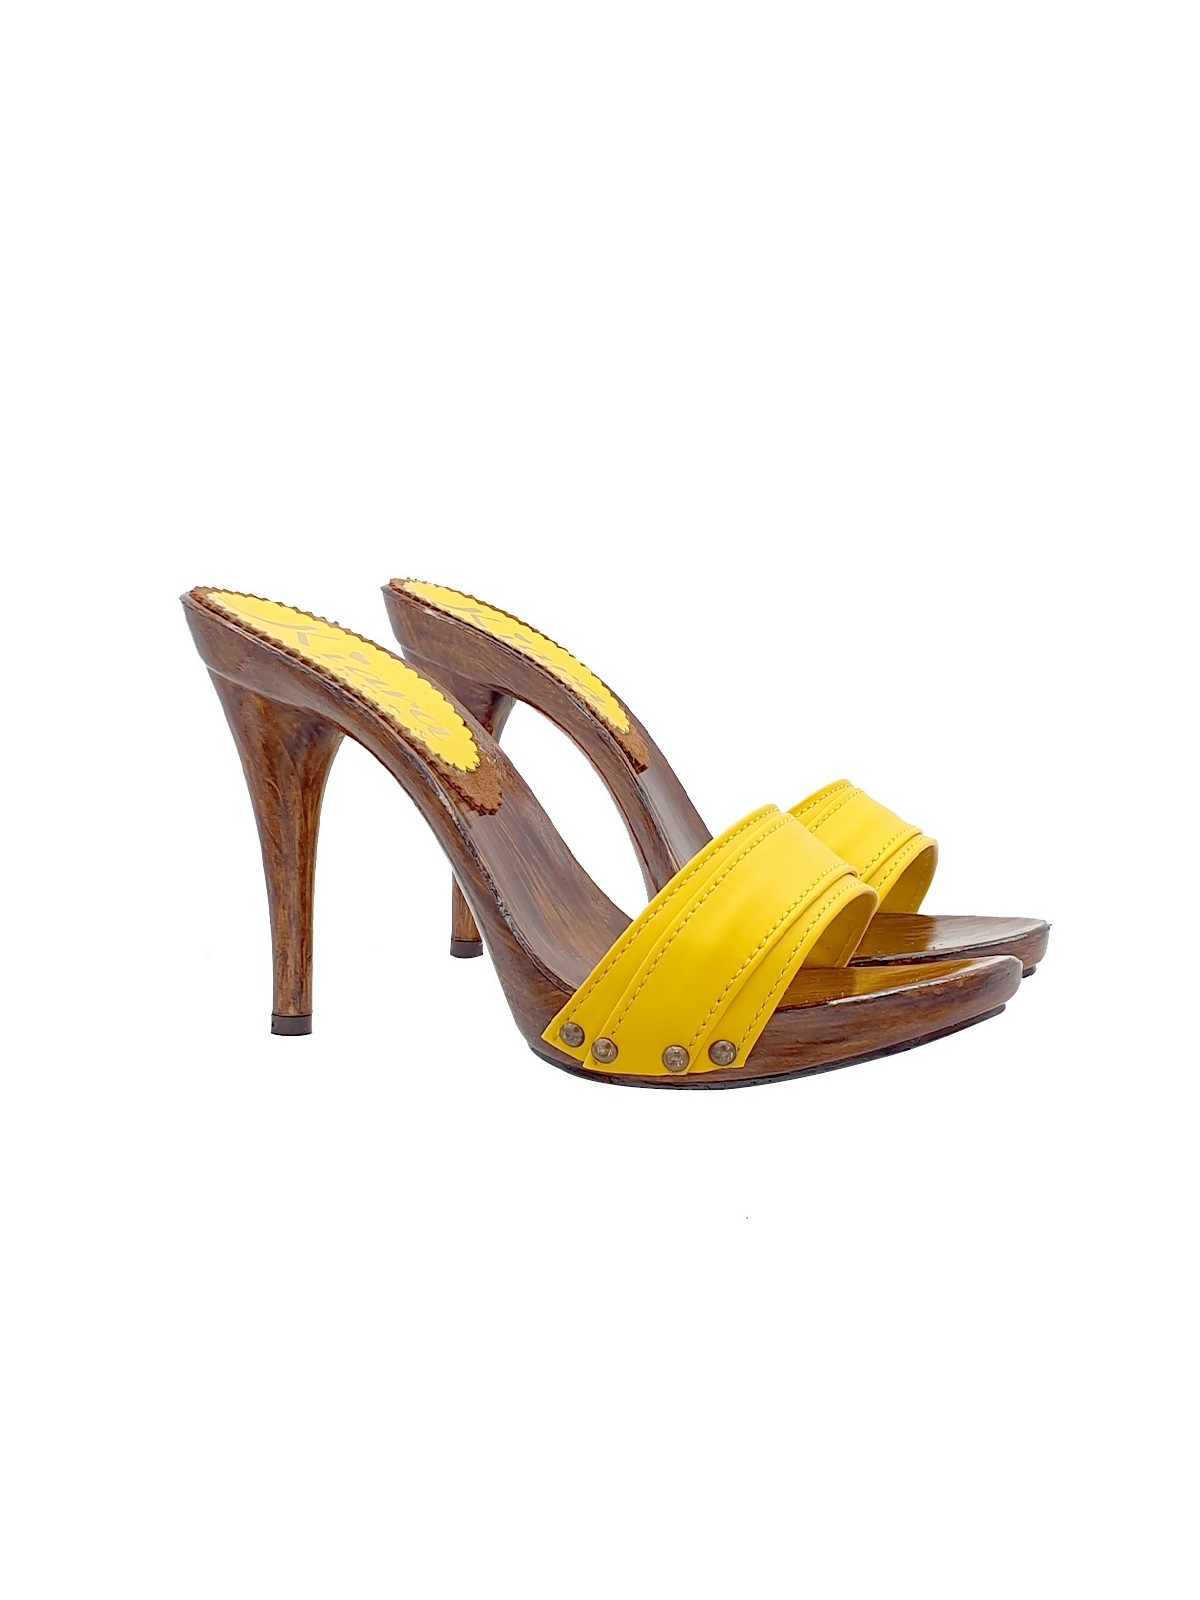 CLOGS IN YELLOW LEATHER AND HIGH HEEL